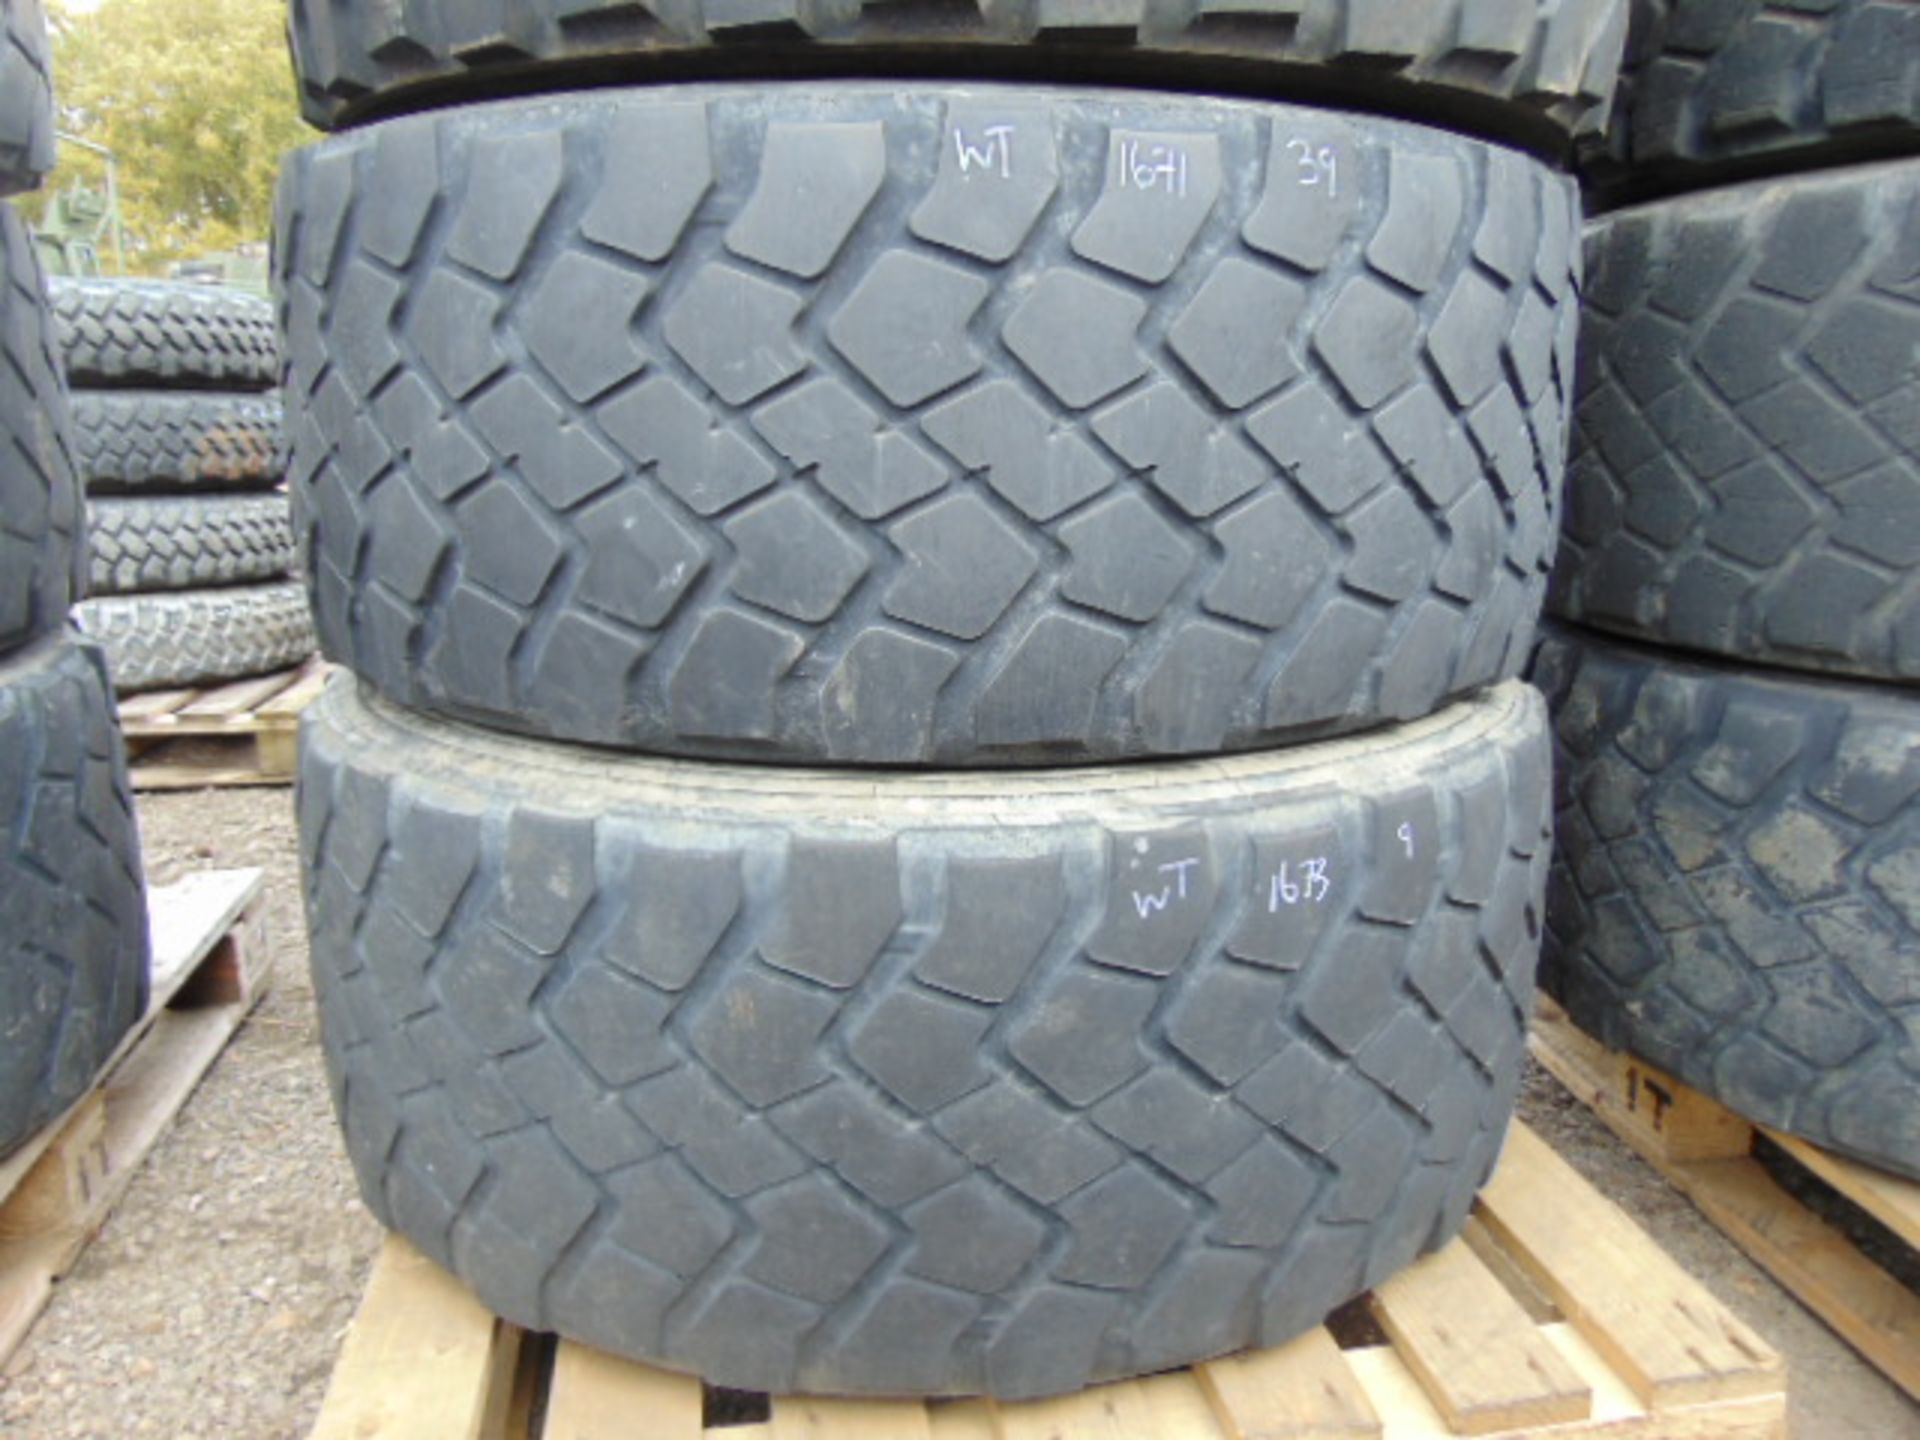 8 x Michelin XZL 445/65 R22.5 Tyres - Image 3 of 7